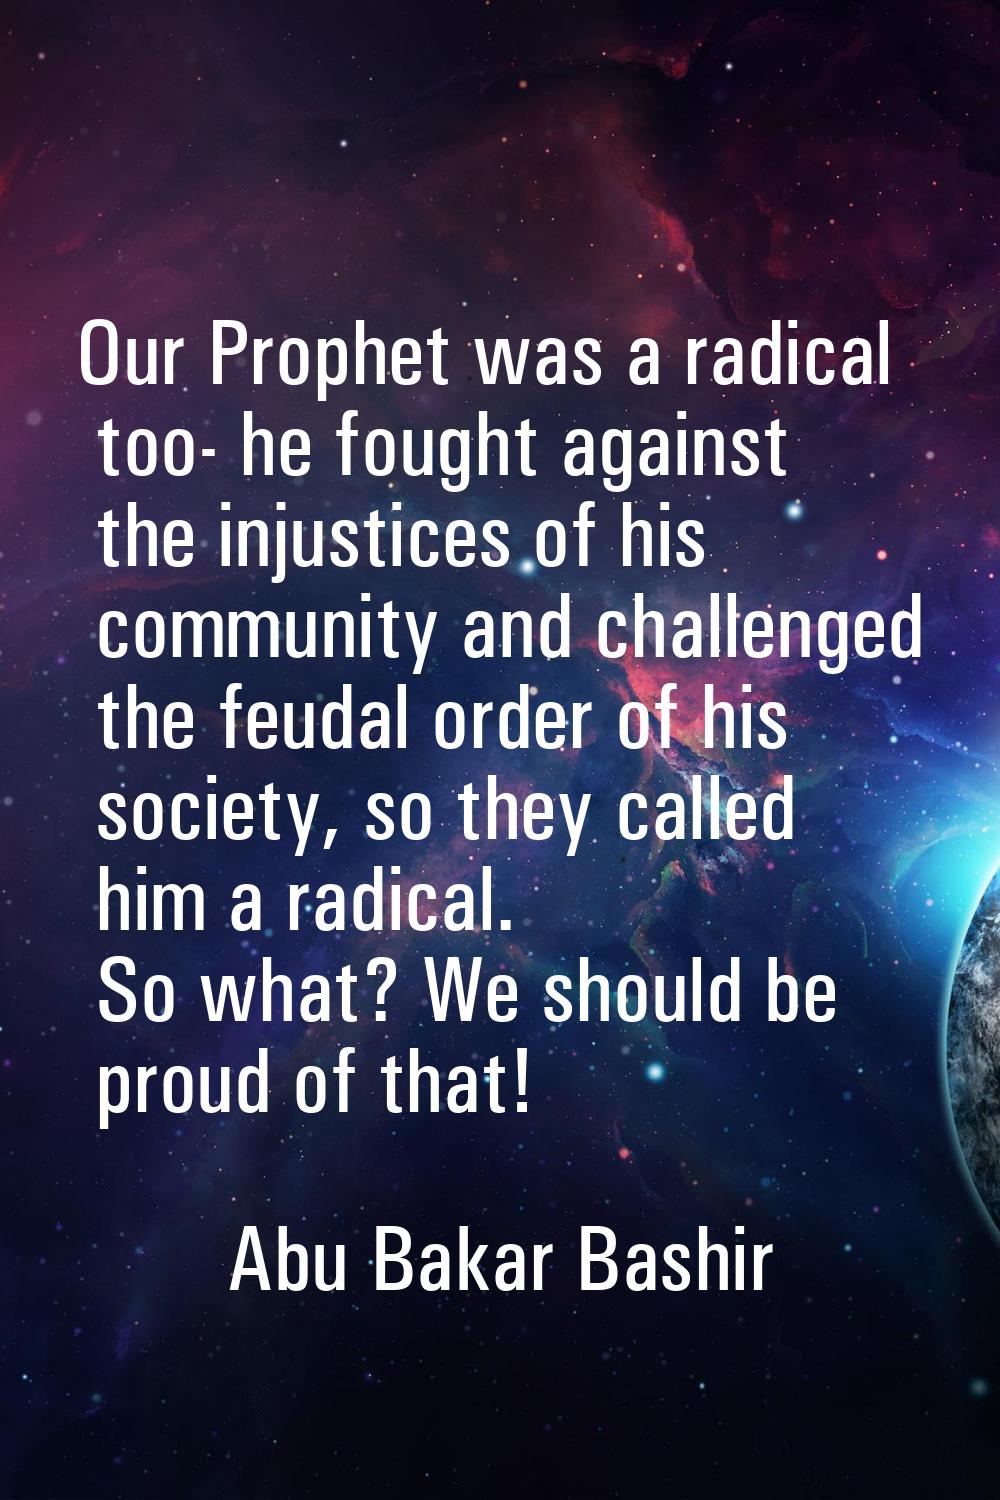 Our Prophet was a radical too- he fought against the injustices of his community and challenged the